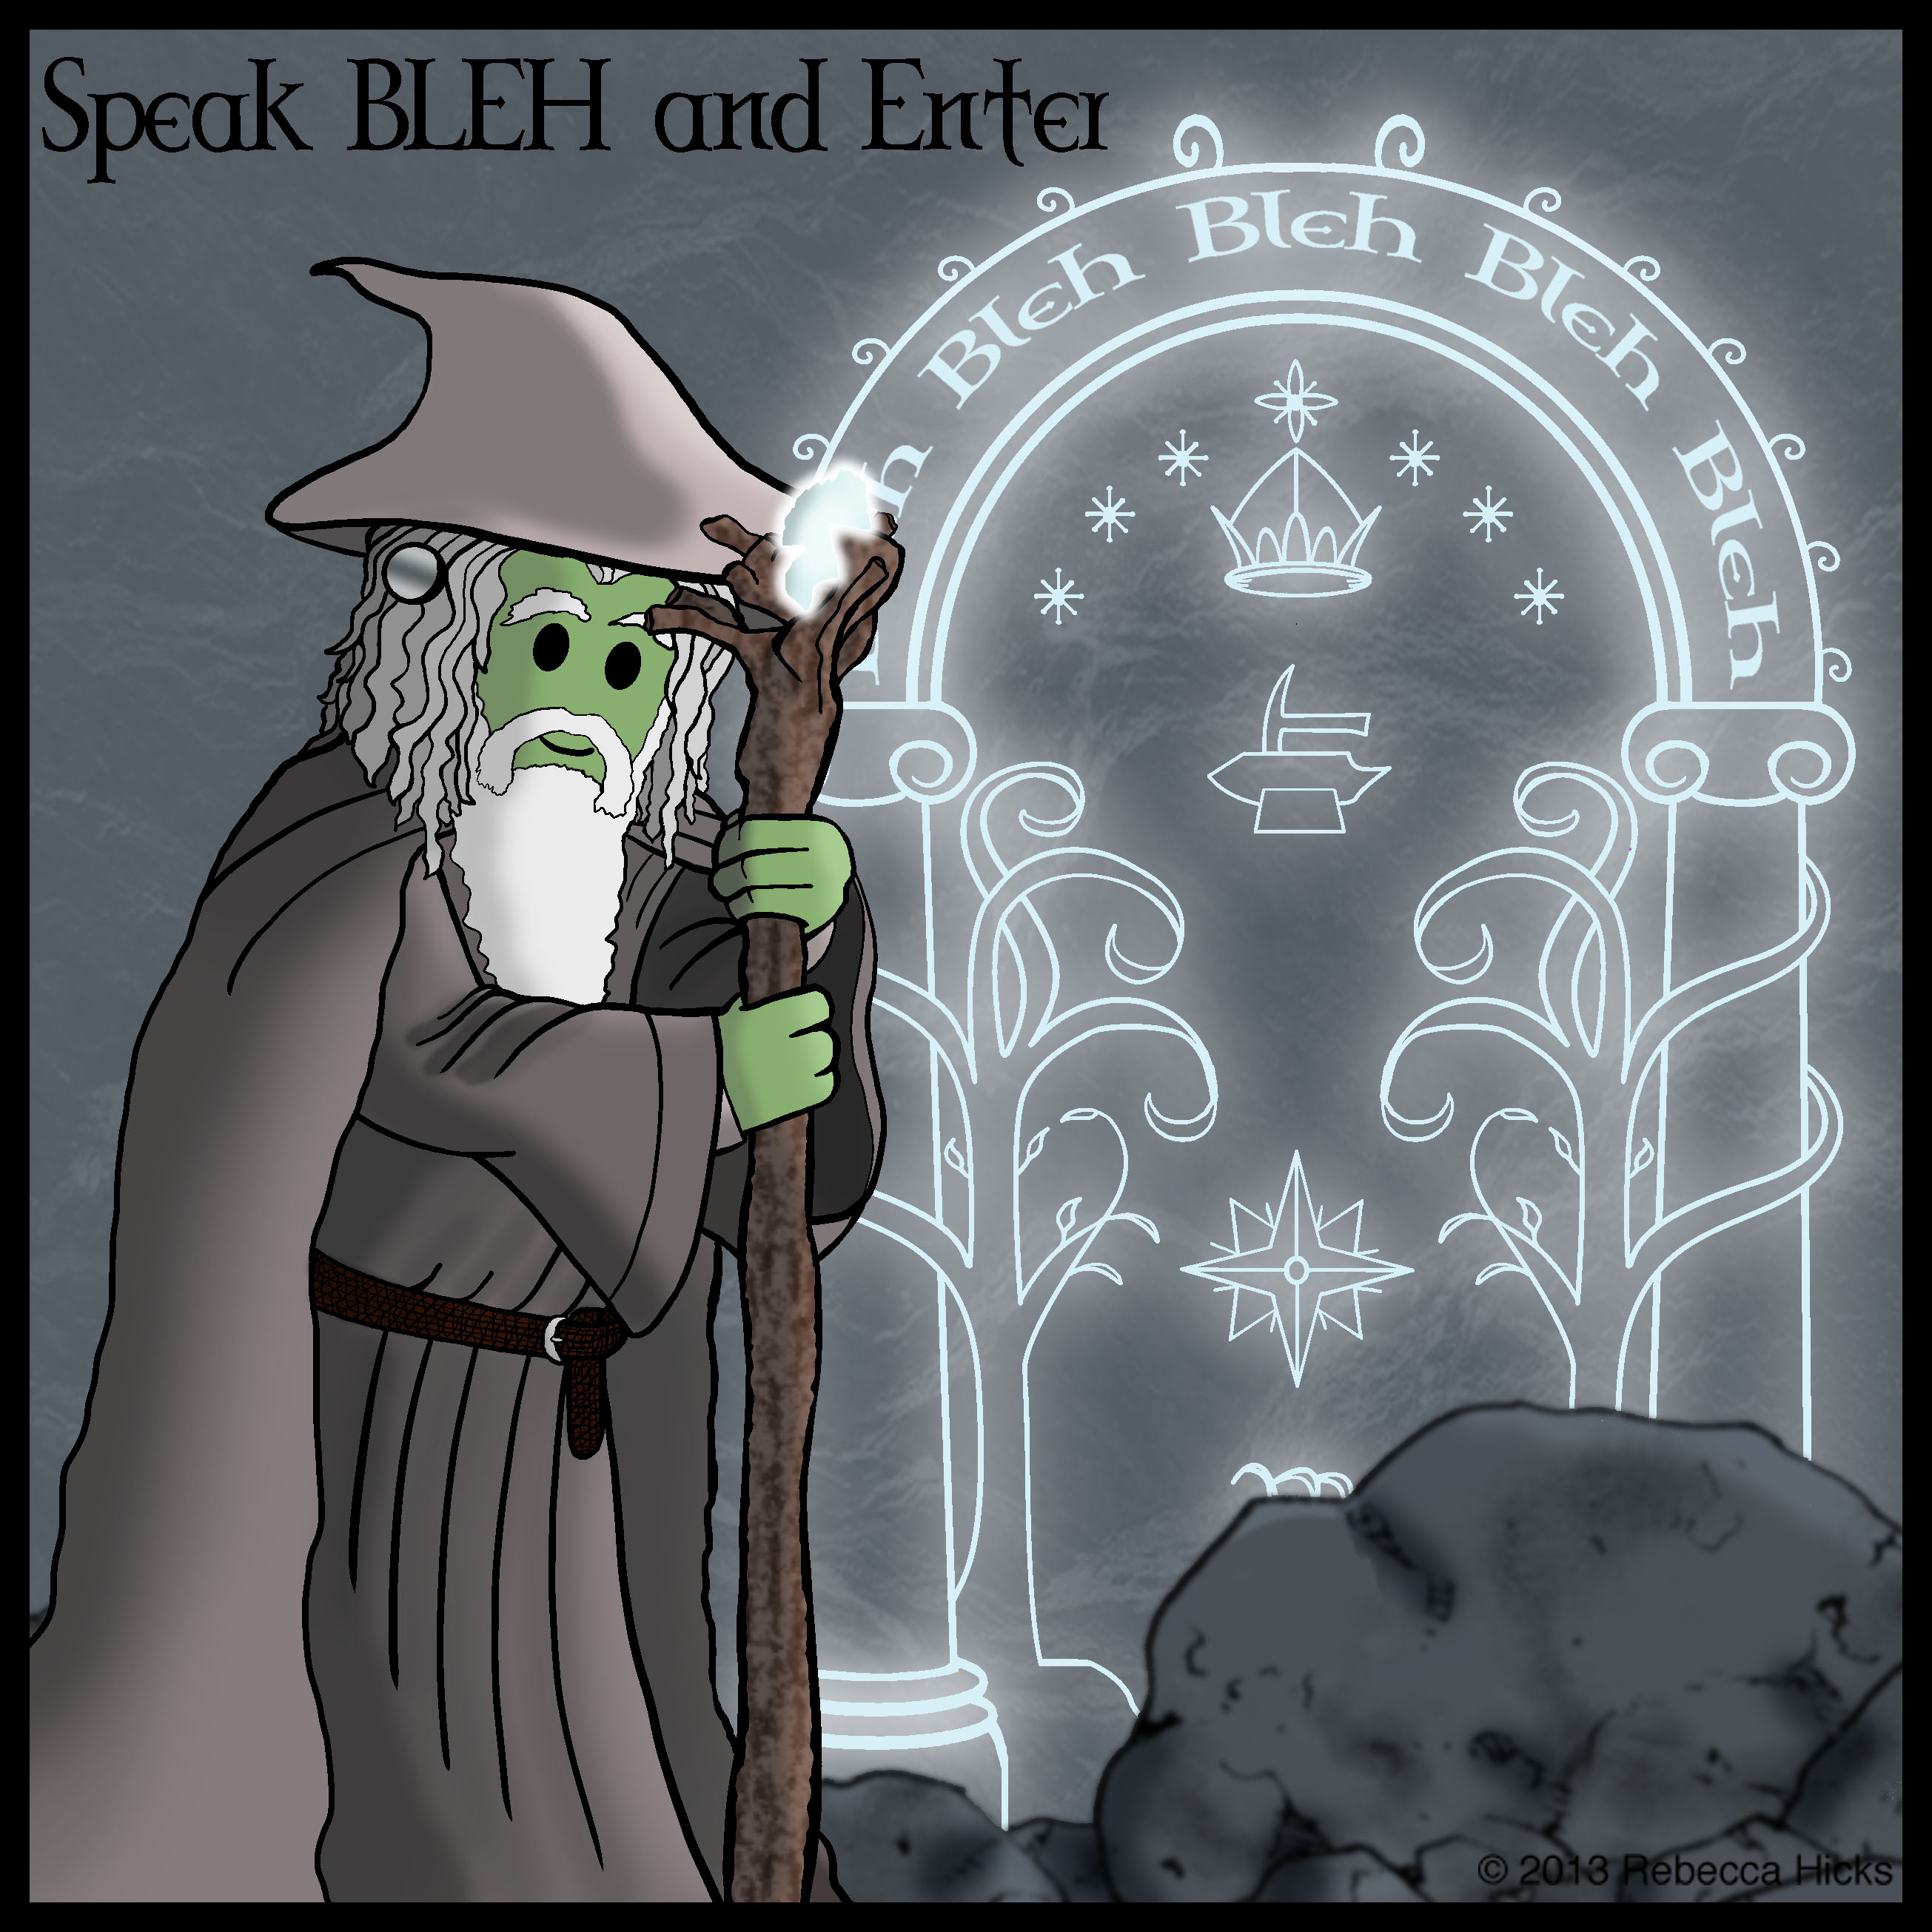 Frank, dressed as Gandalf, stands in front of a glowing door. The caption reads “Speak BLEH and enter.